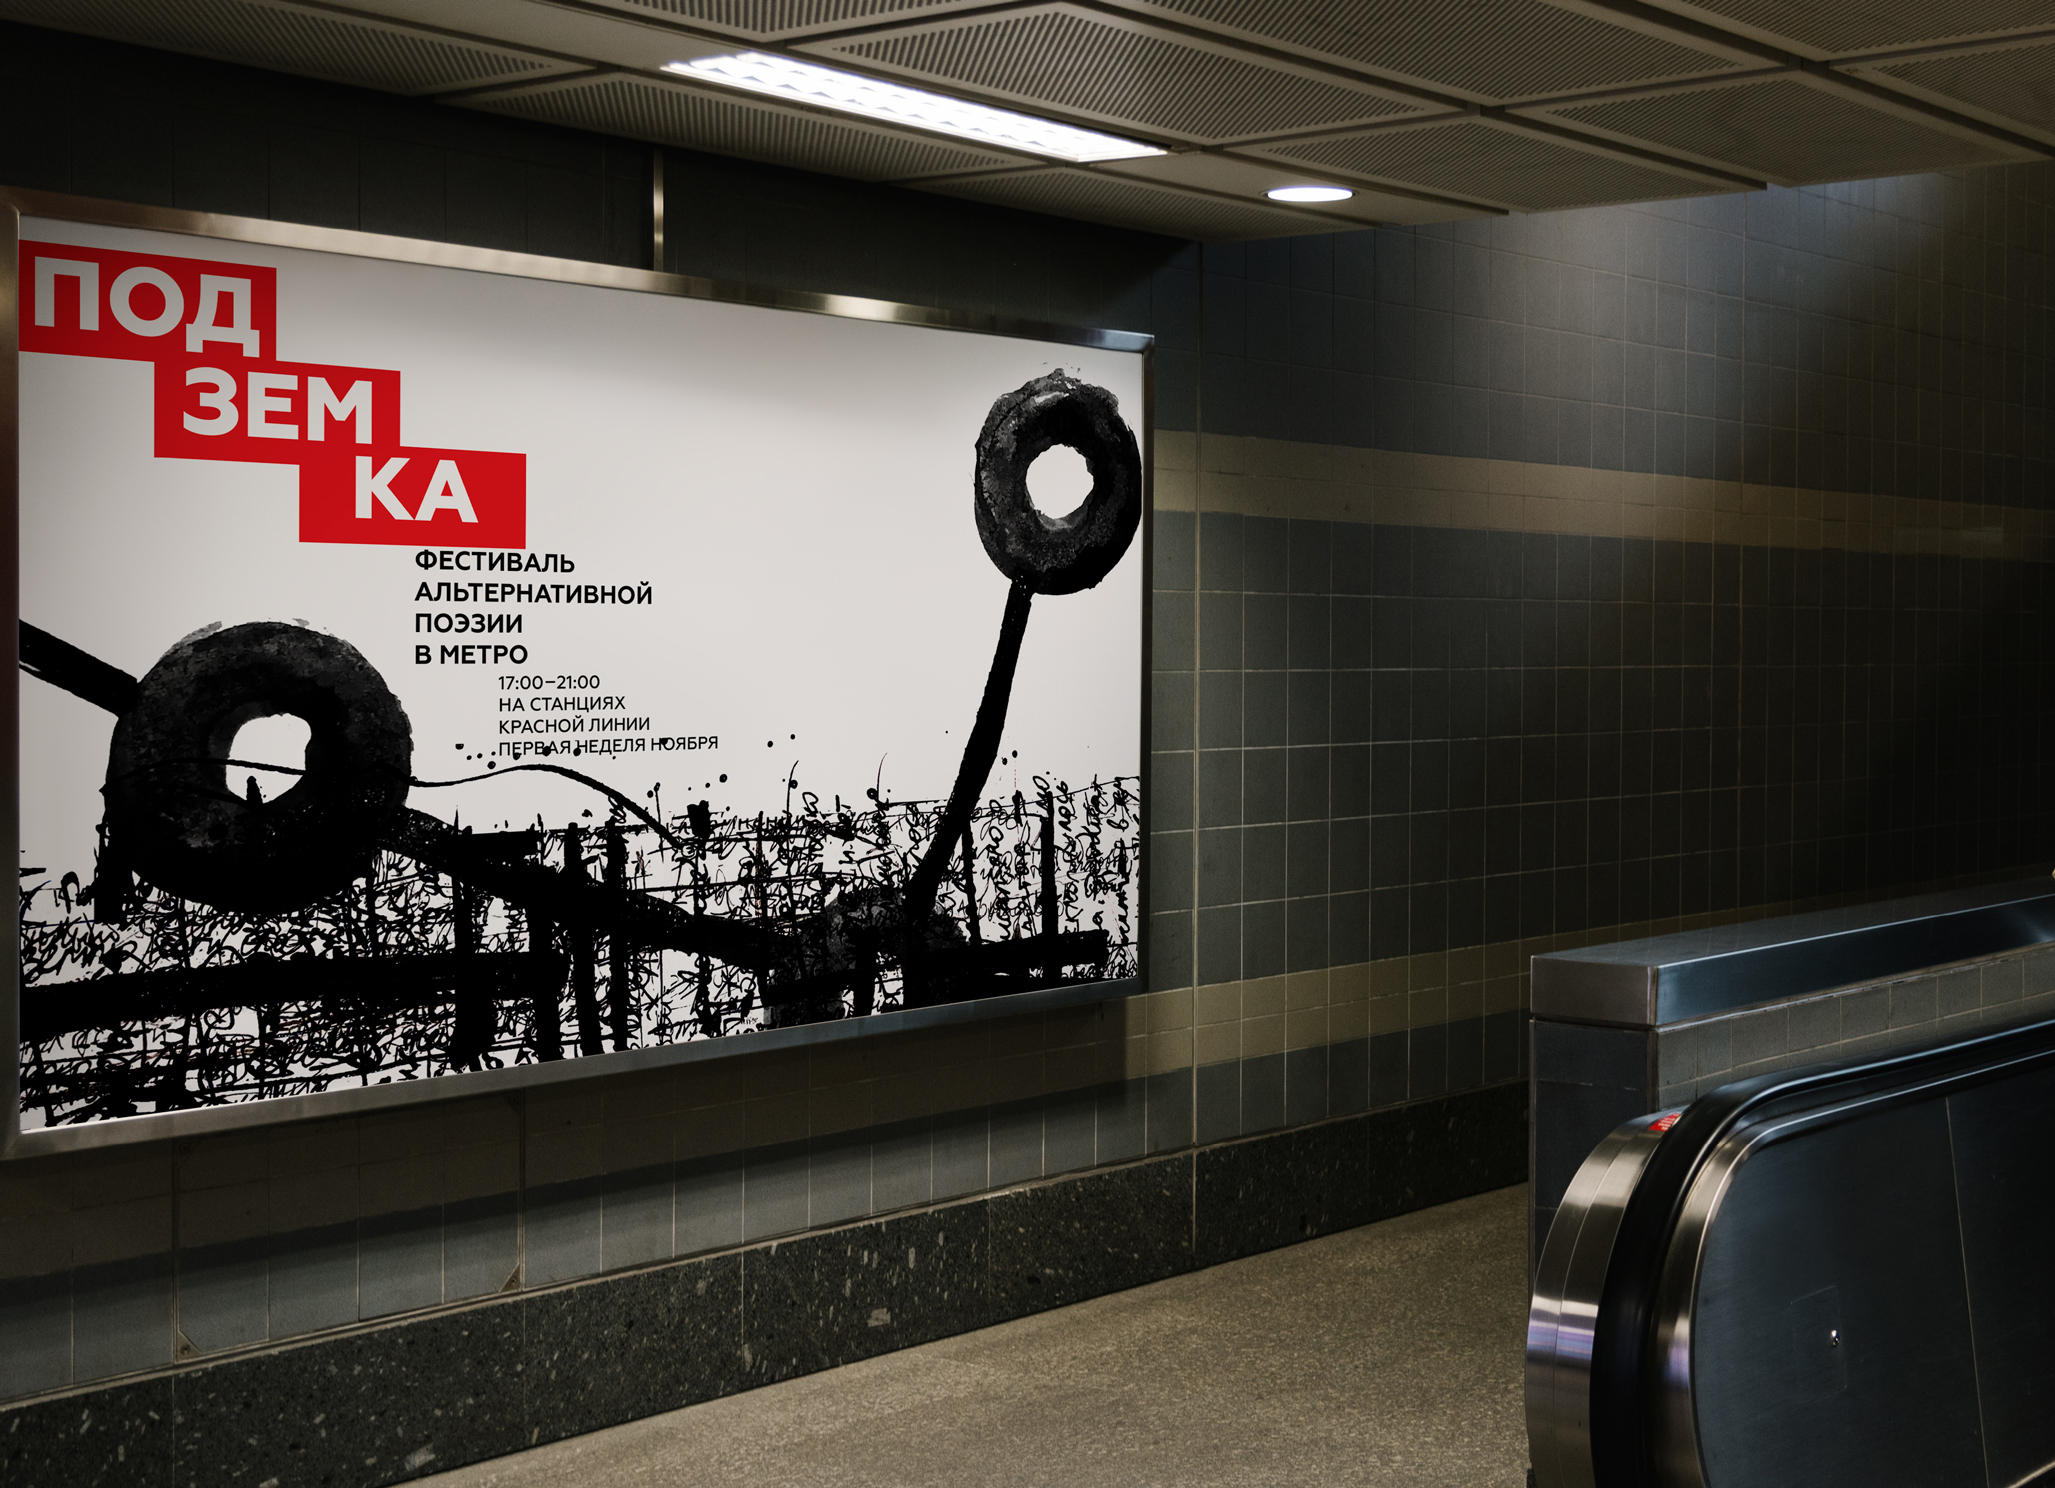 Student Concept for Festival of Contemporary Poetry in Moscow Underground Podzemka